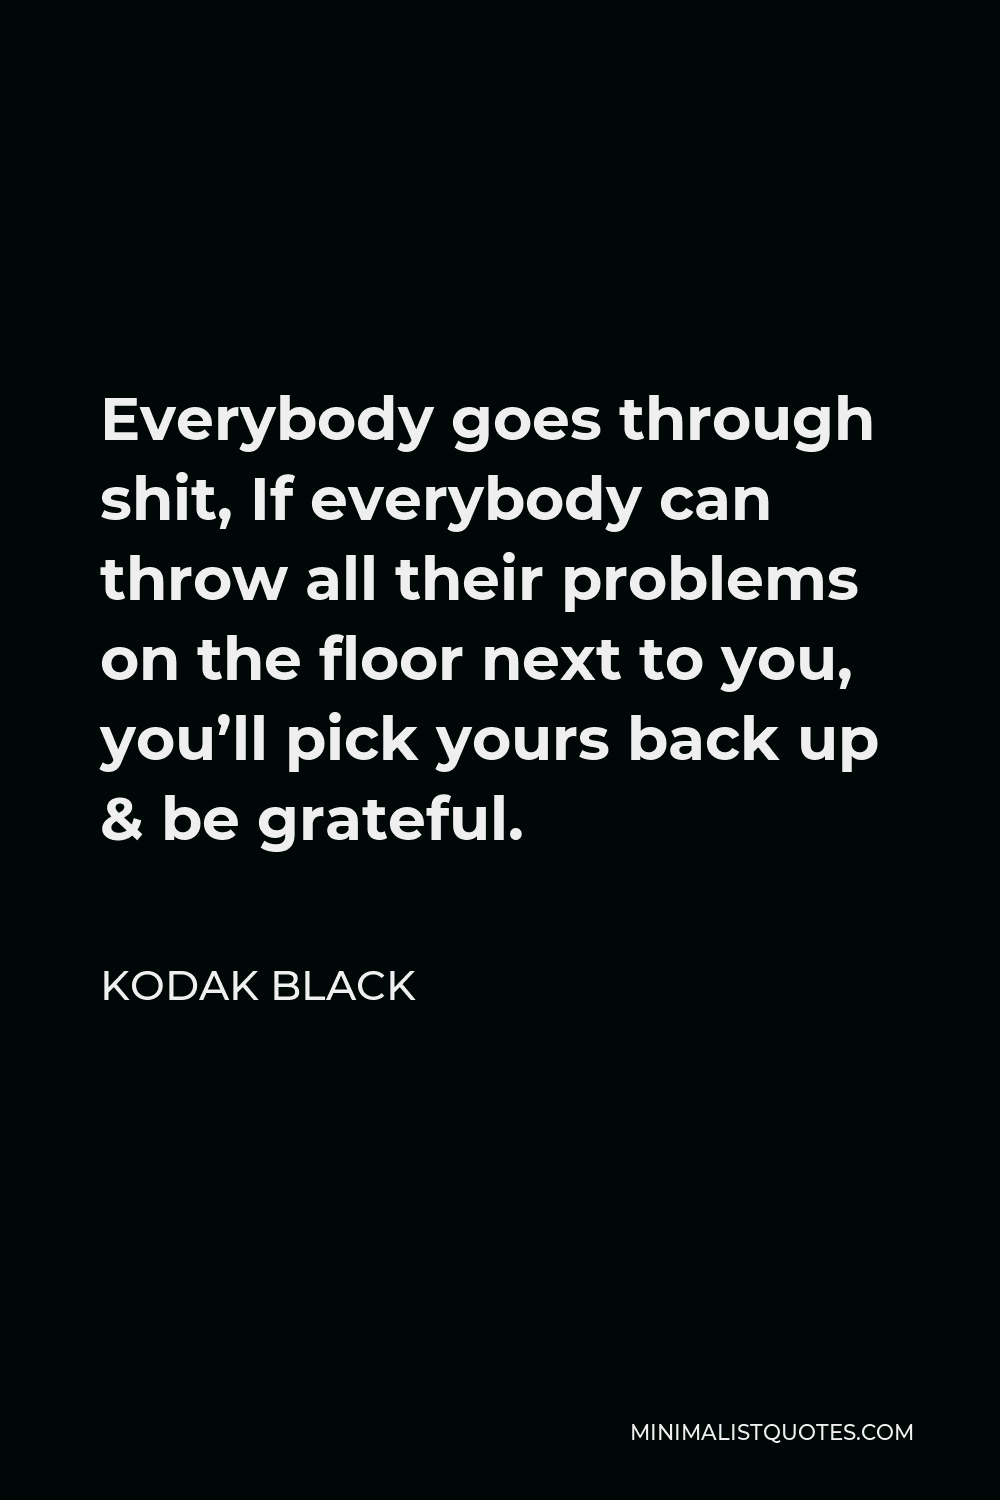 Kodak Black Quote - Everybody goes through shit, If everybody can throw all their problems on the floor next to you, you’ll pick yours back up & be grateful.